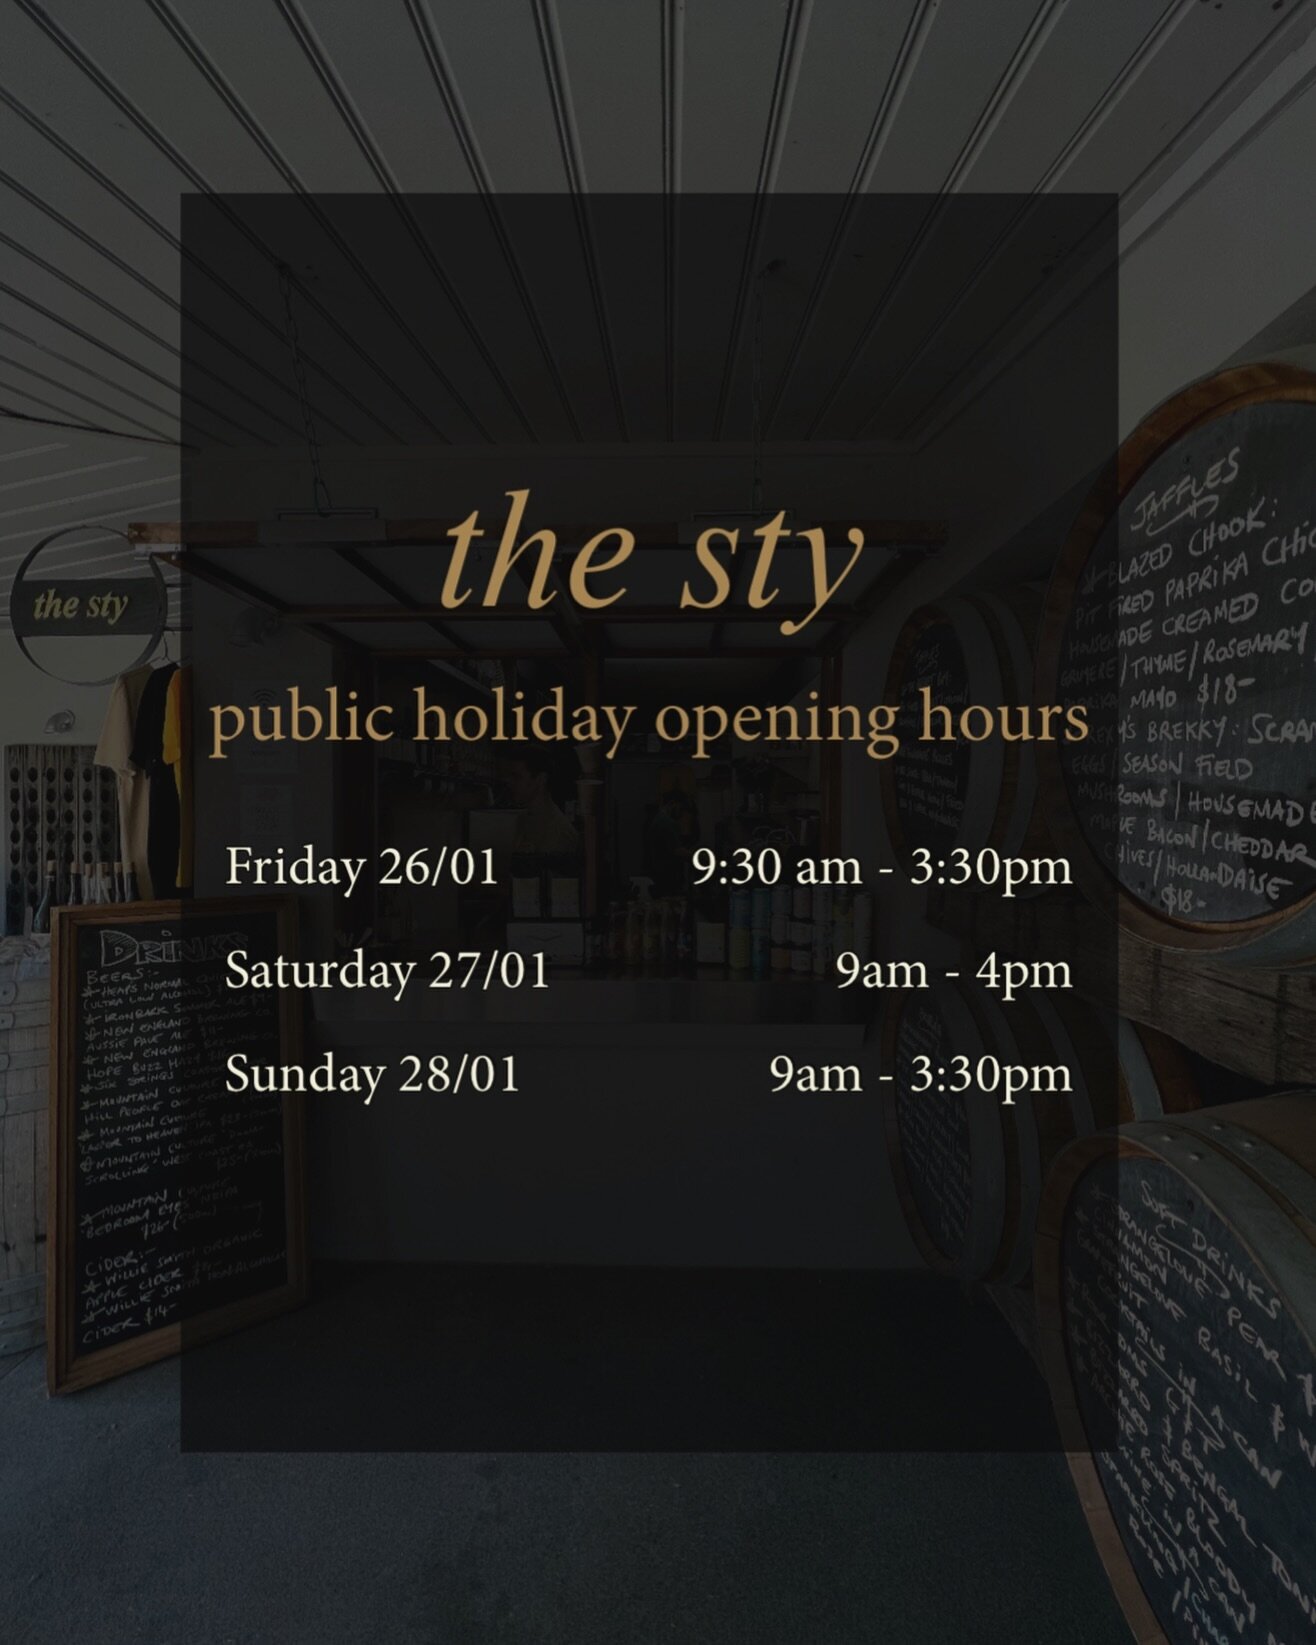 The Sty will be open this Friday through to Sunday. 
With warm weather ahead we will have our communal room available with the aircon pumping. So come in &amp; cool down in The Sty cafe.